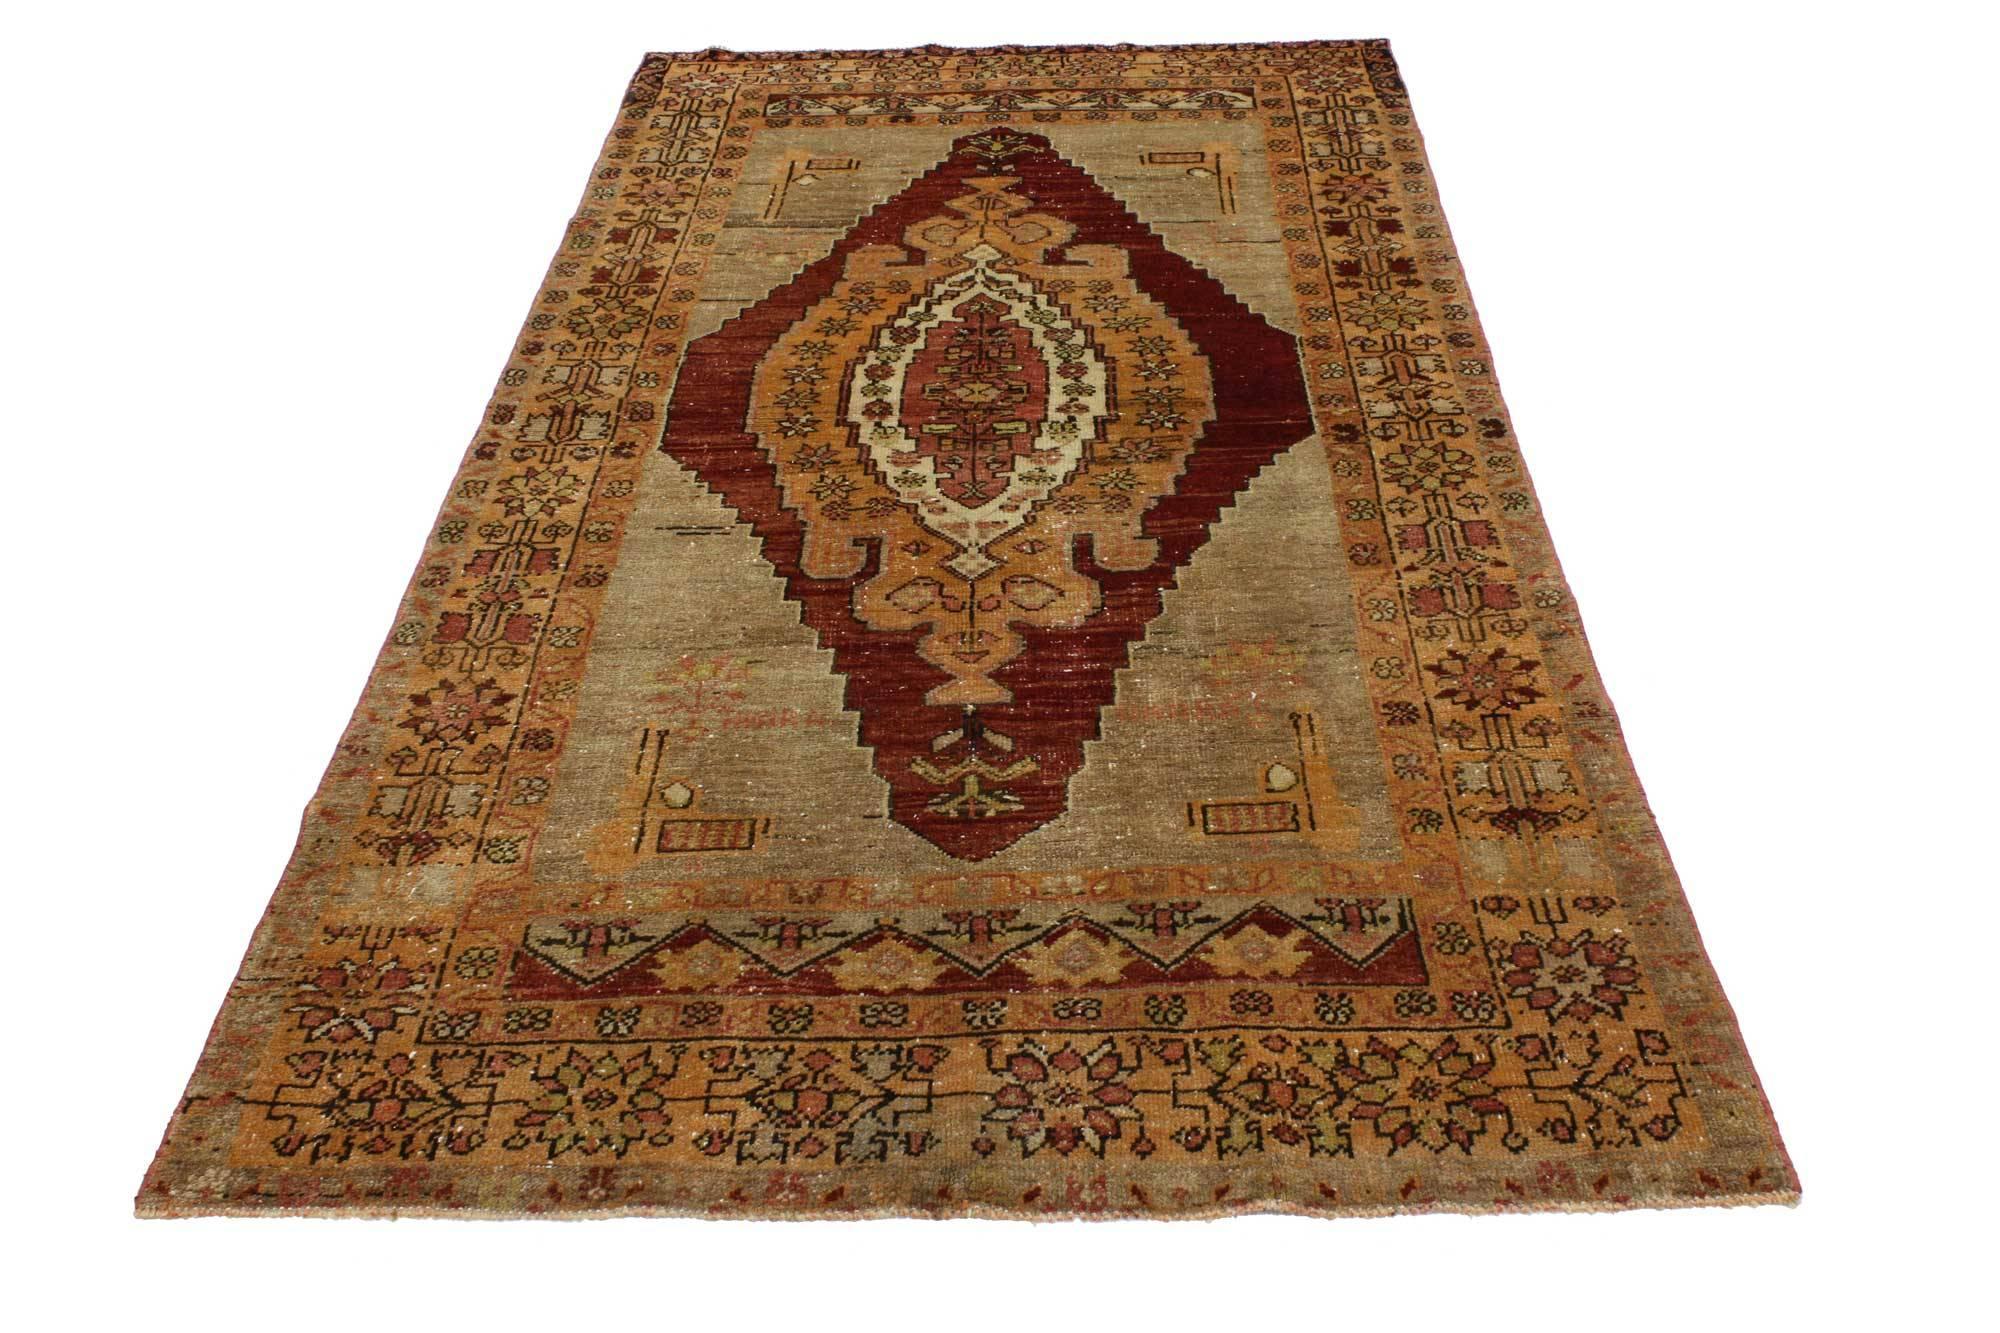 51704, vintage Turkish Oushak accent rug, entry or foyer rug. This vintage Turkish Oushak rug features a modern traditional style. Immersed in Anatolian history and refined colors, this vintage Oushak rug combines simplicity with sophistication.